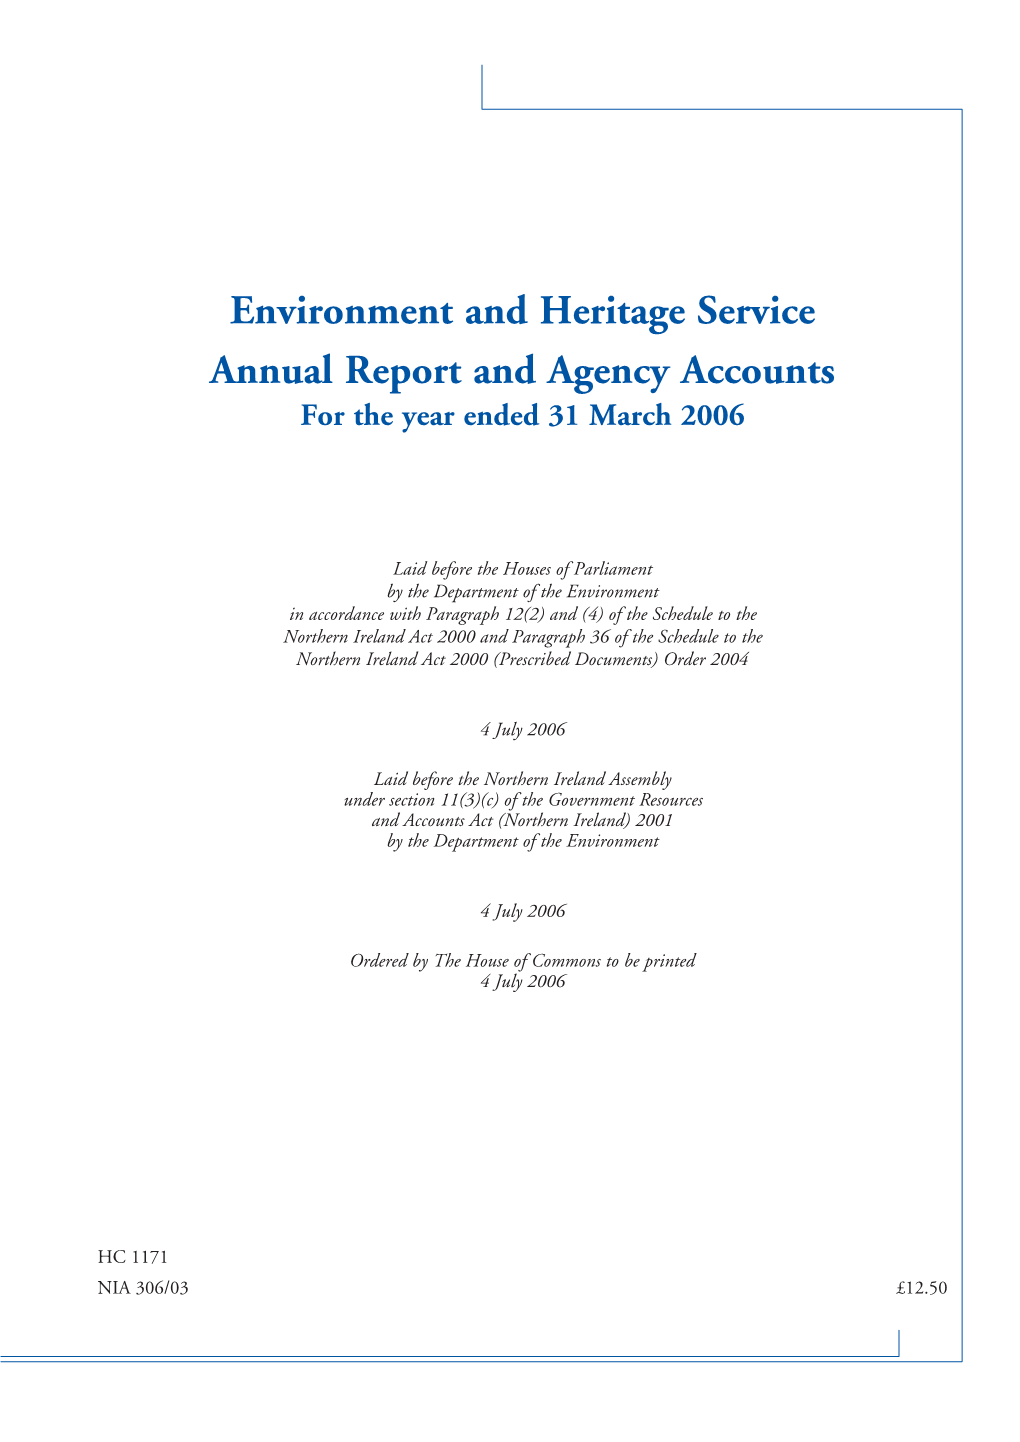 Environment and Heritage Service Annual Report and Agency Accounts for the Year Ended 31 March 2006